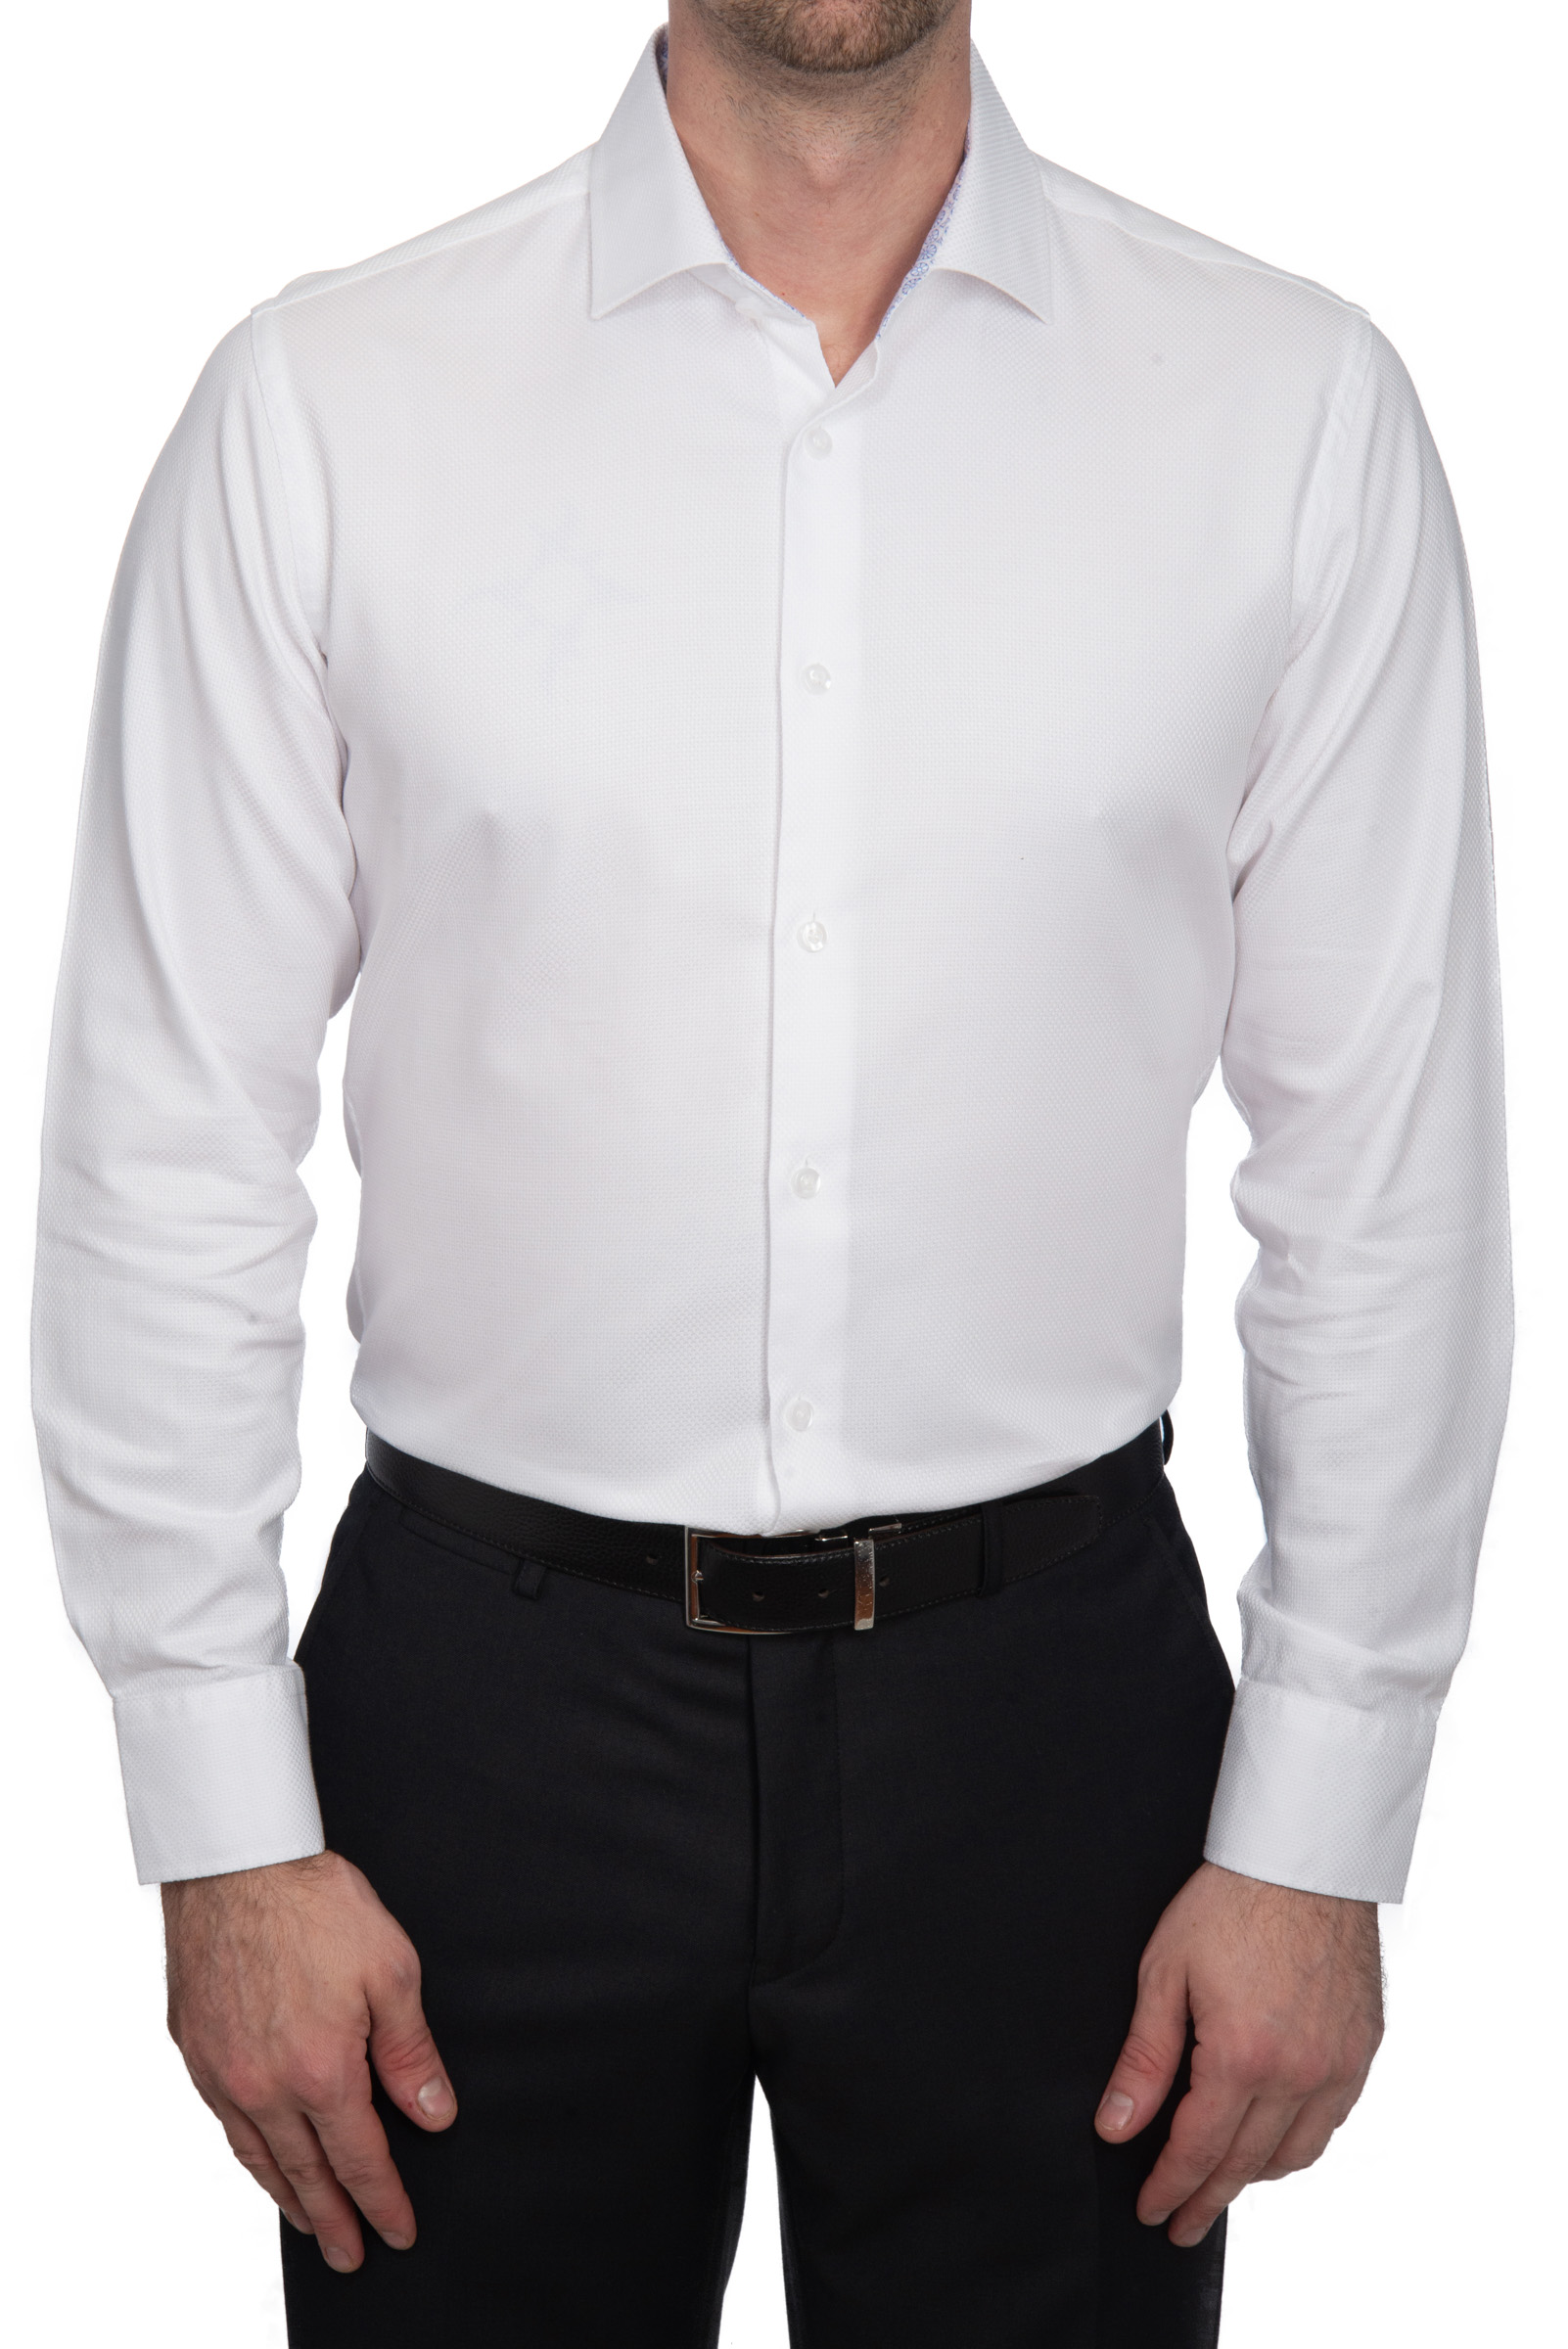 White – Pure Cotton Shirt – Adelaide Suits Direct